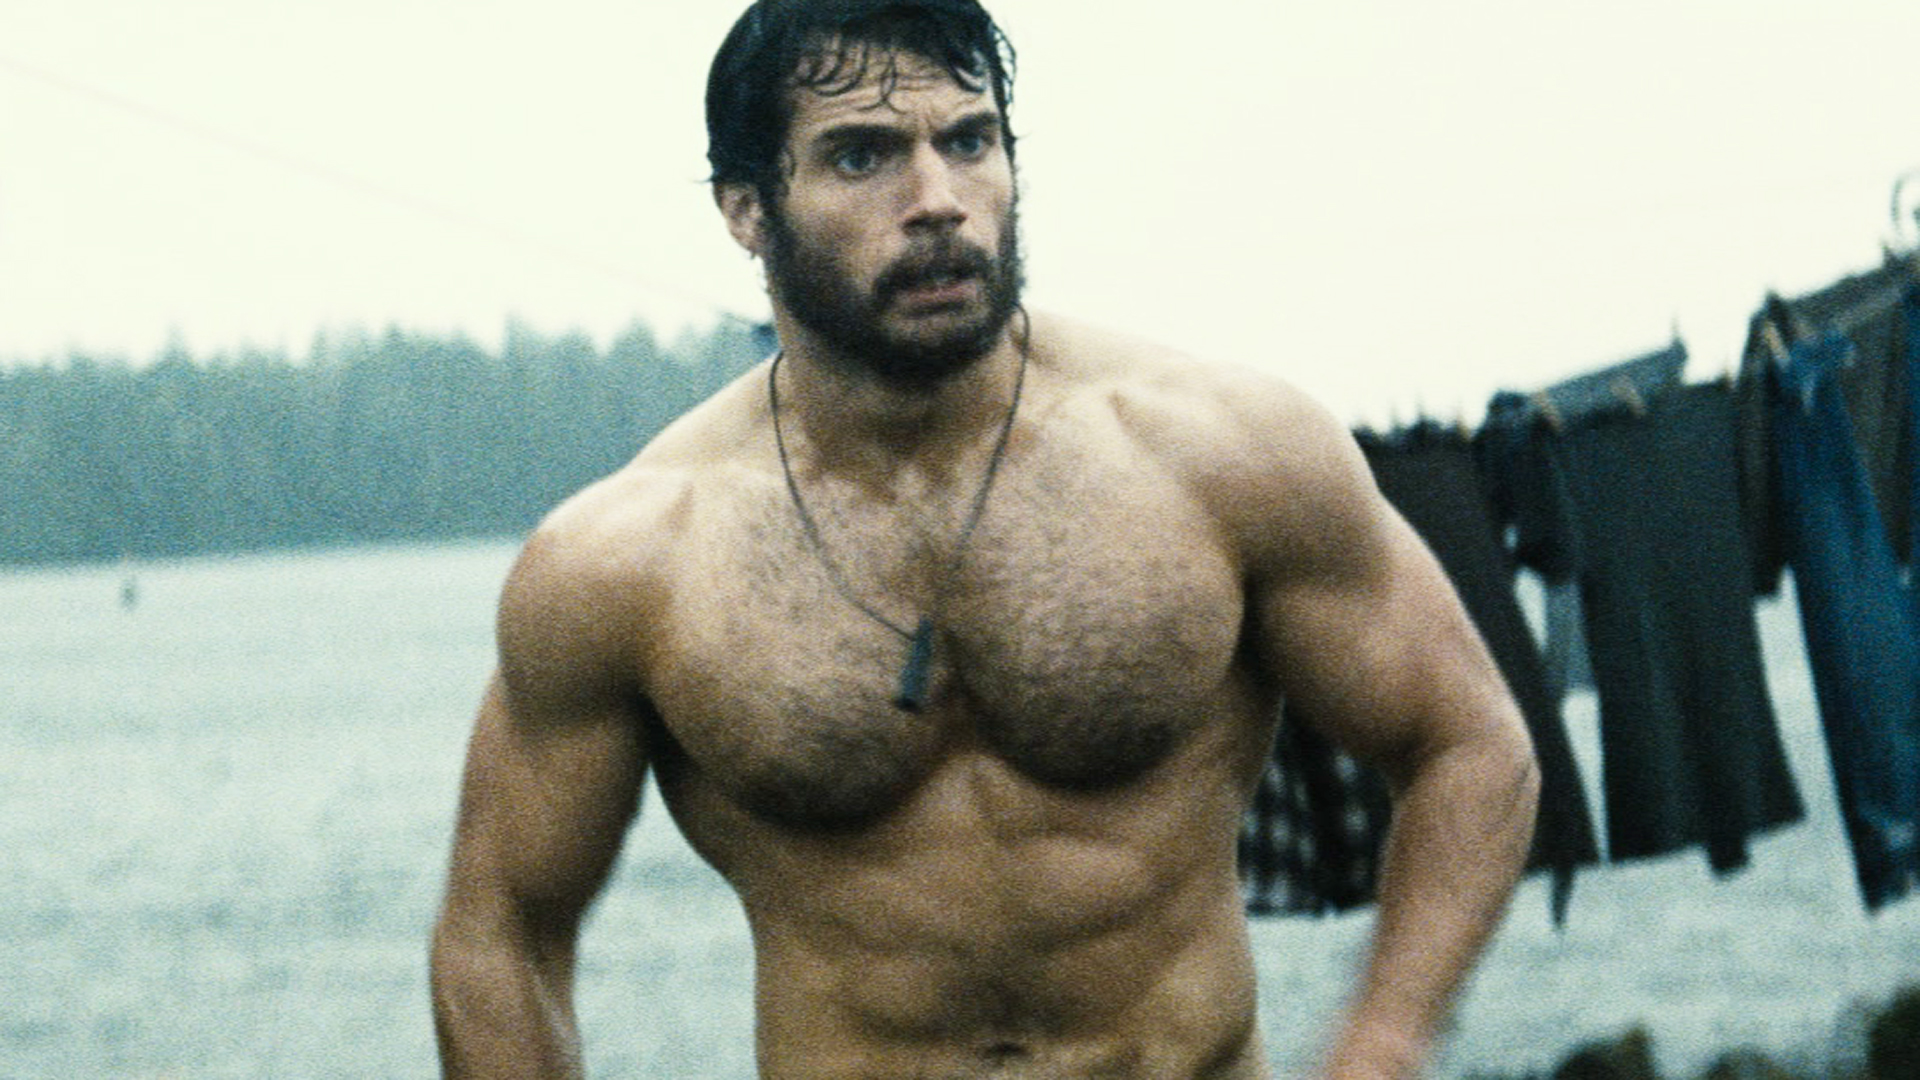 “Rumors are Starting to Spread that Henry Cavill is Playing Wolverine in th...